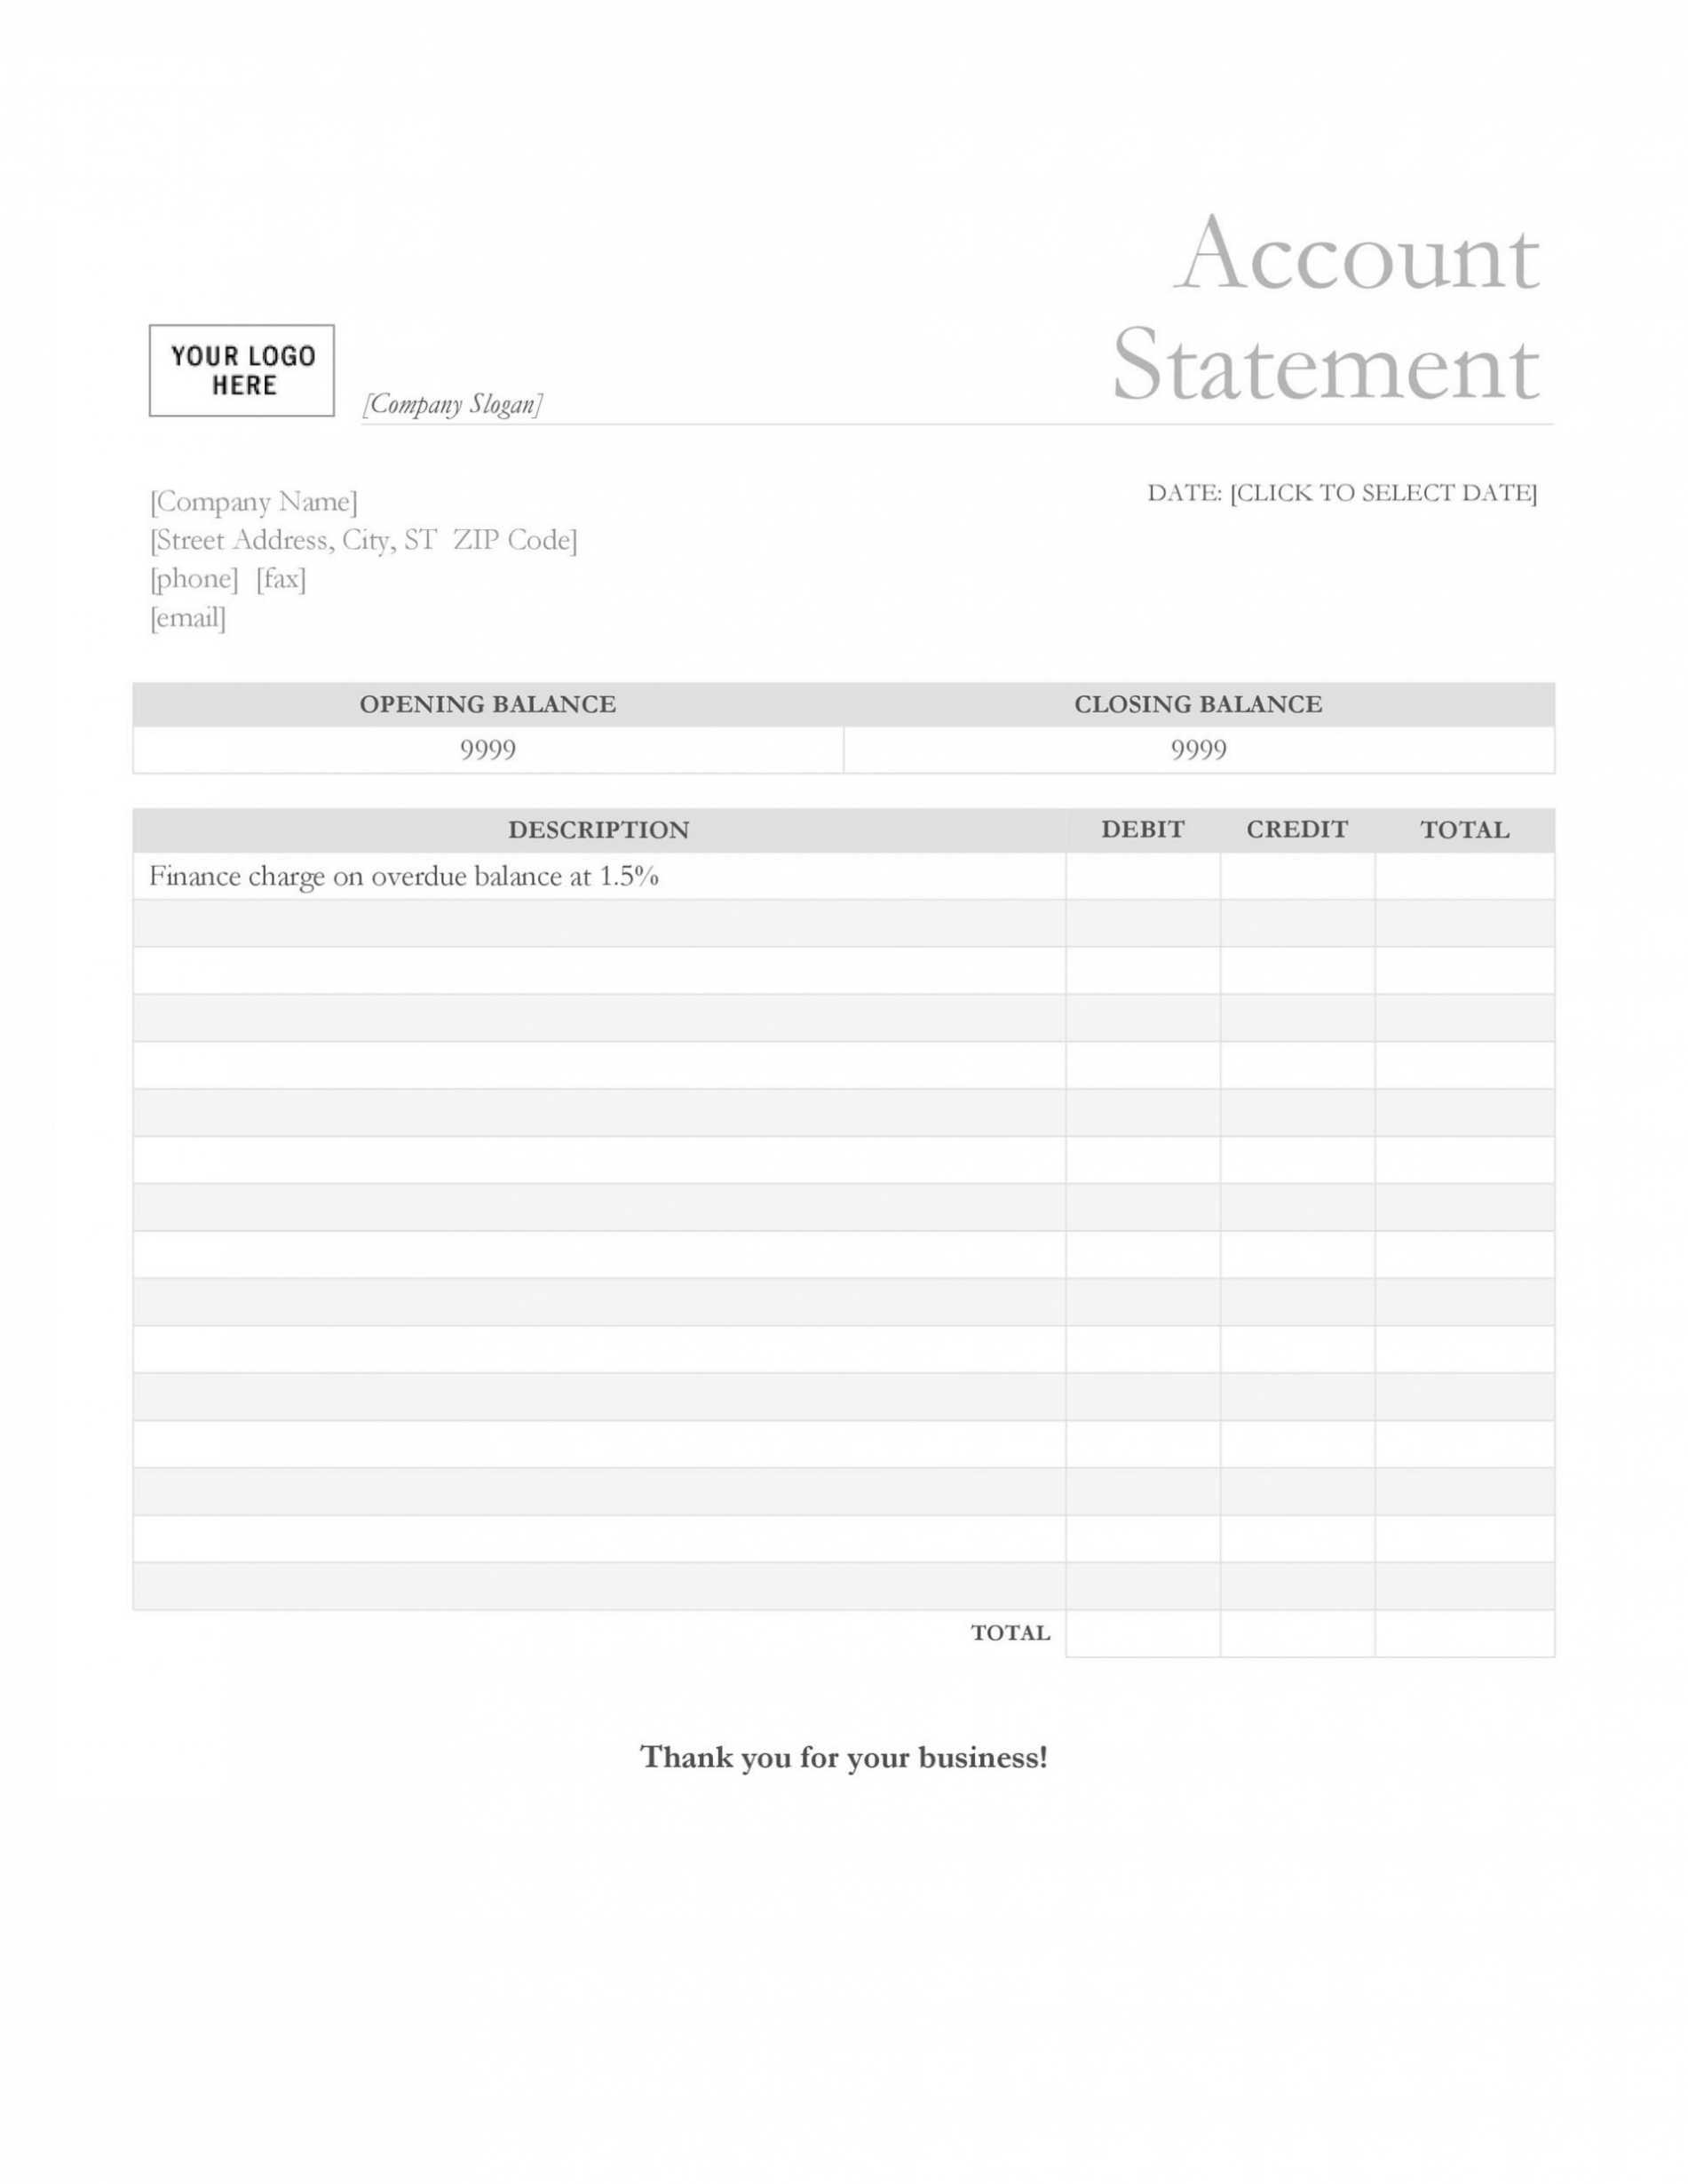 Bank Statement Template Excel ~ Addictionary regarding Credit Card Statement Template Excel